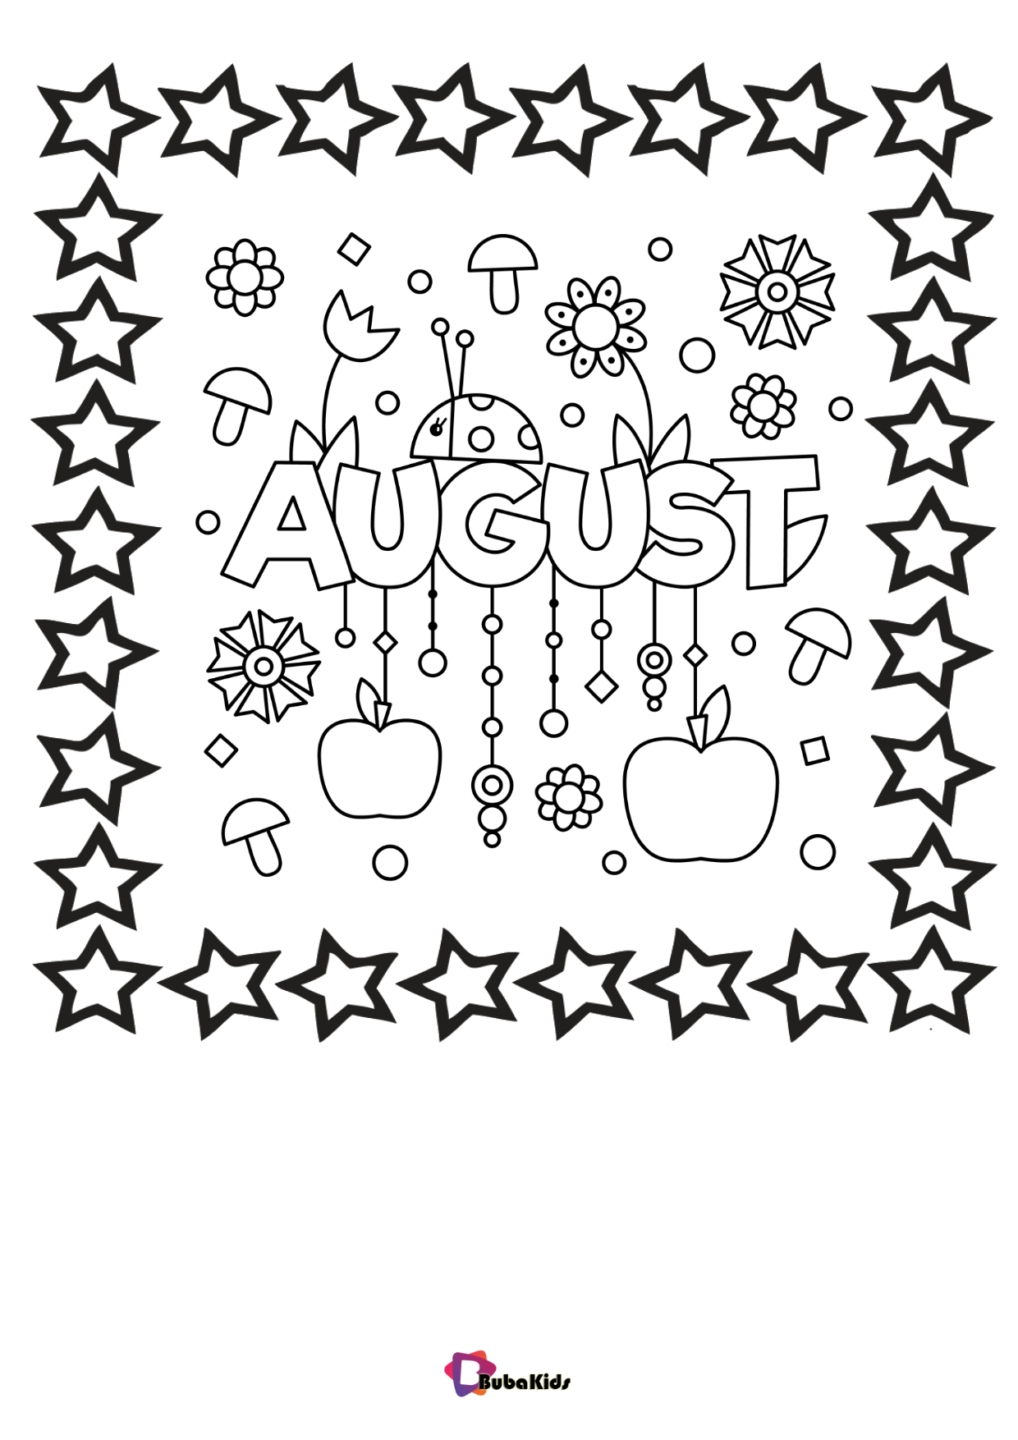 Printable August month name summer coloring page